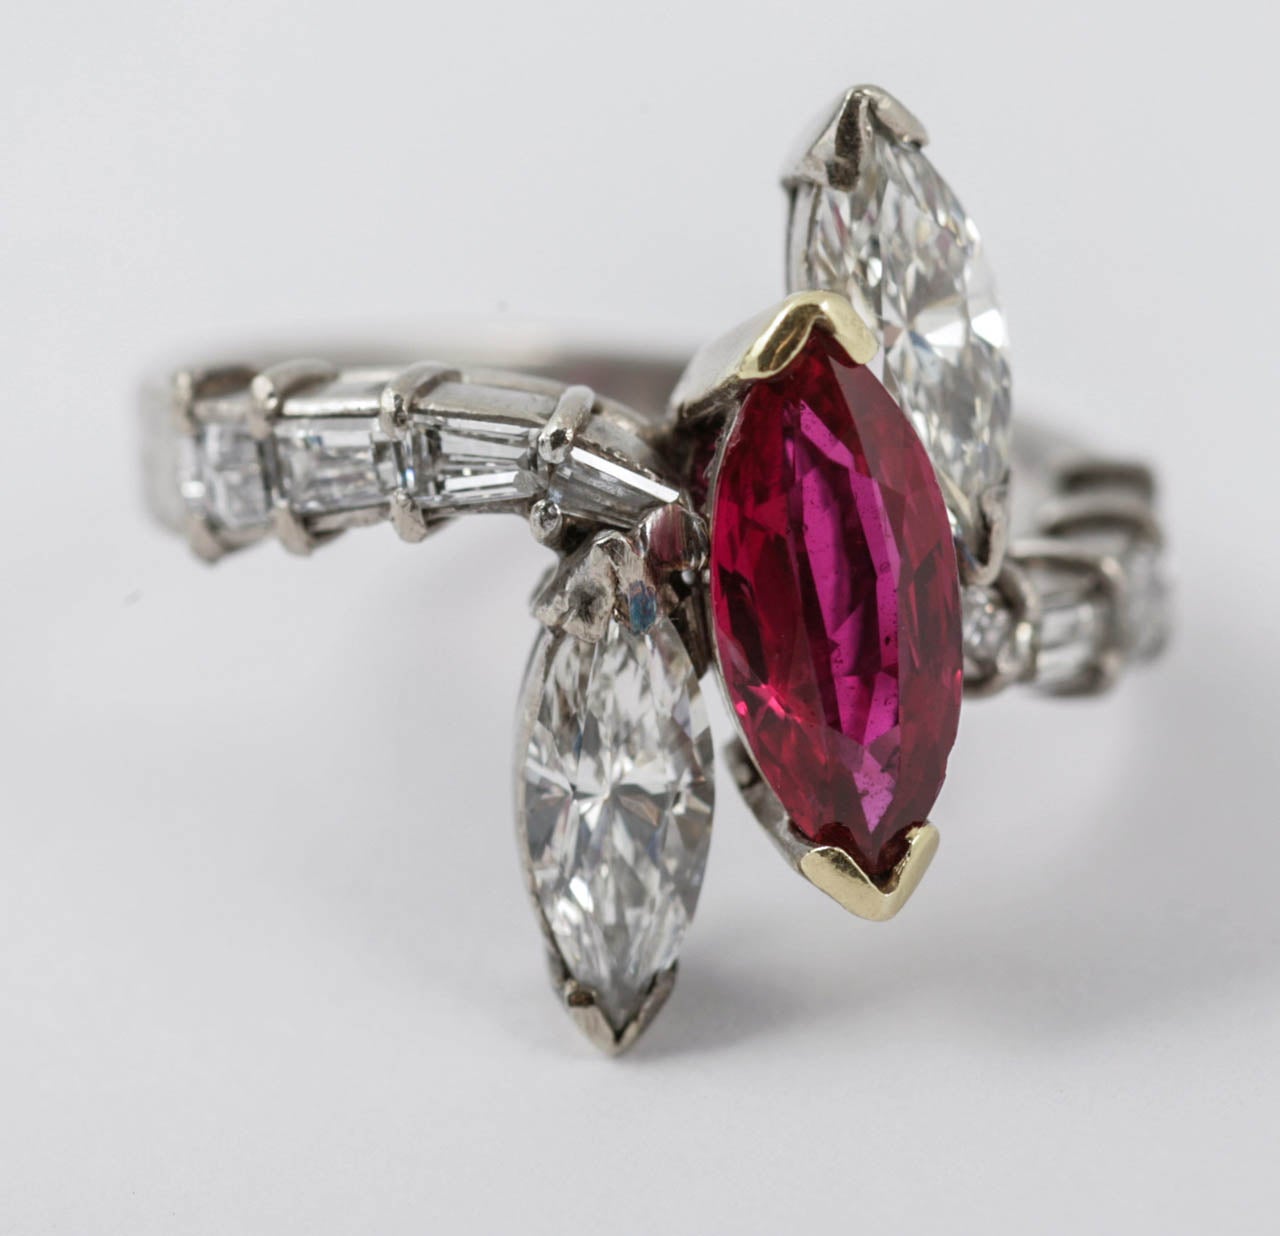 Marquise shaped ruby and diamond three stone ring with tapered baguette diamond shoulders, mounted in platinum.